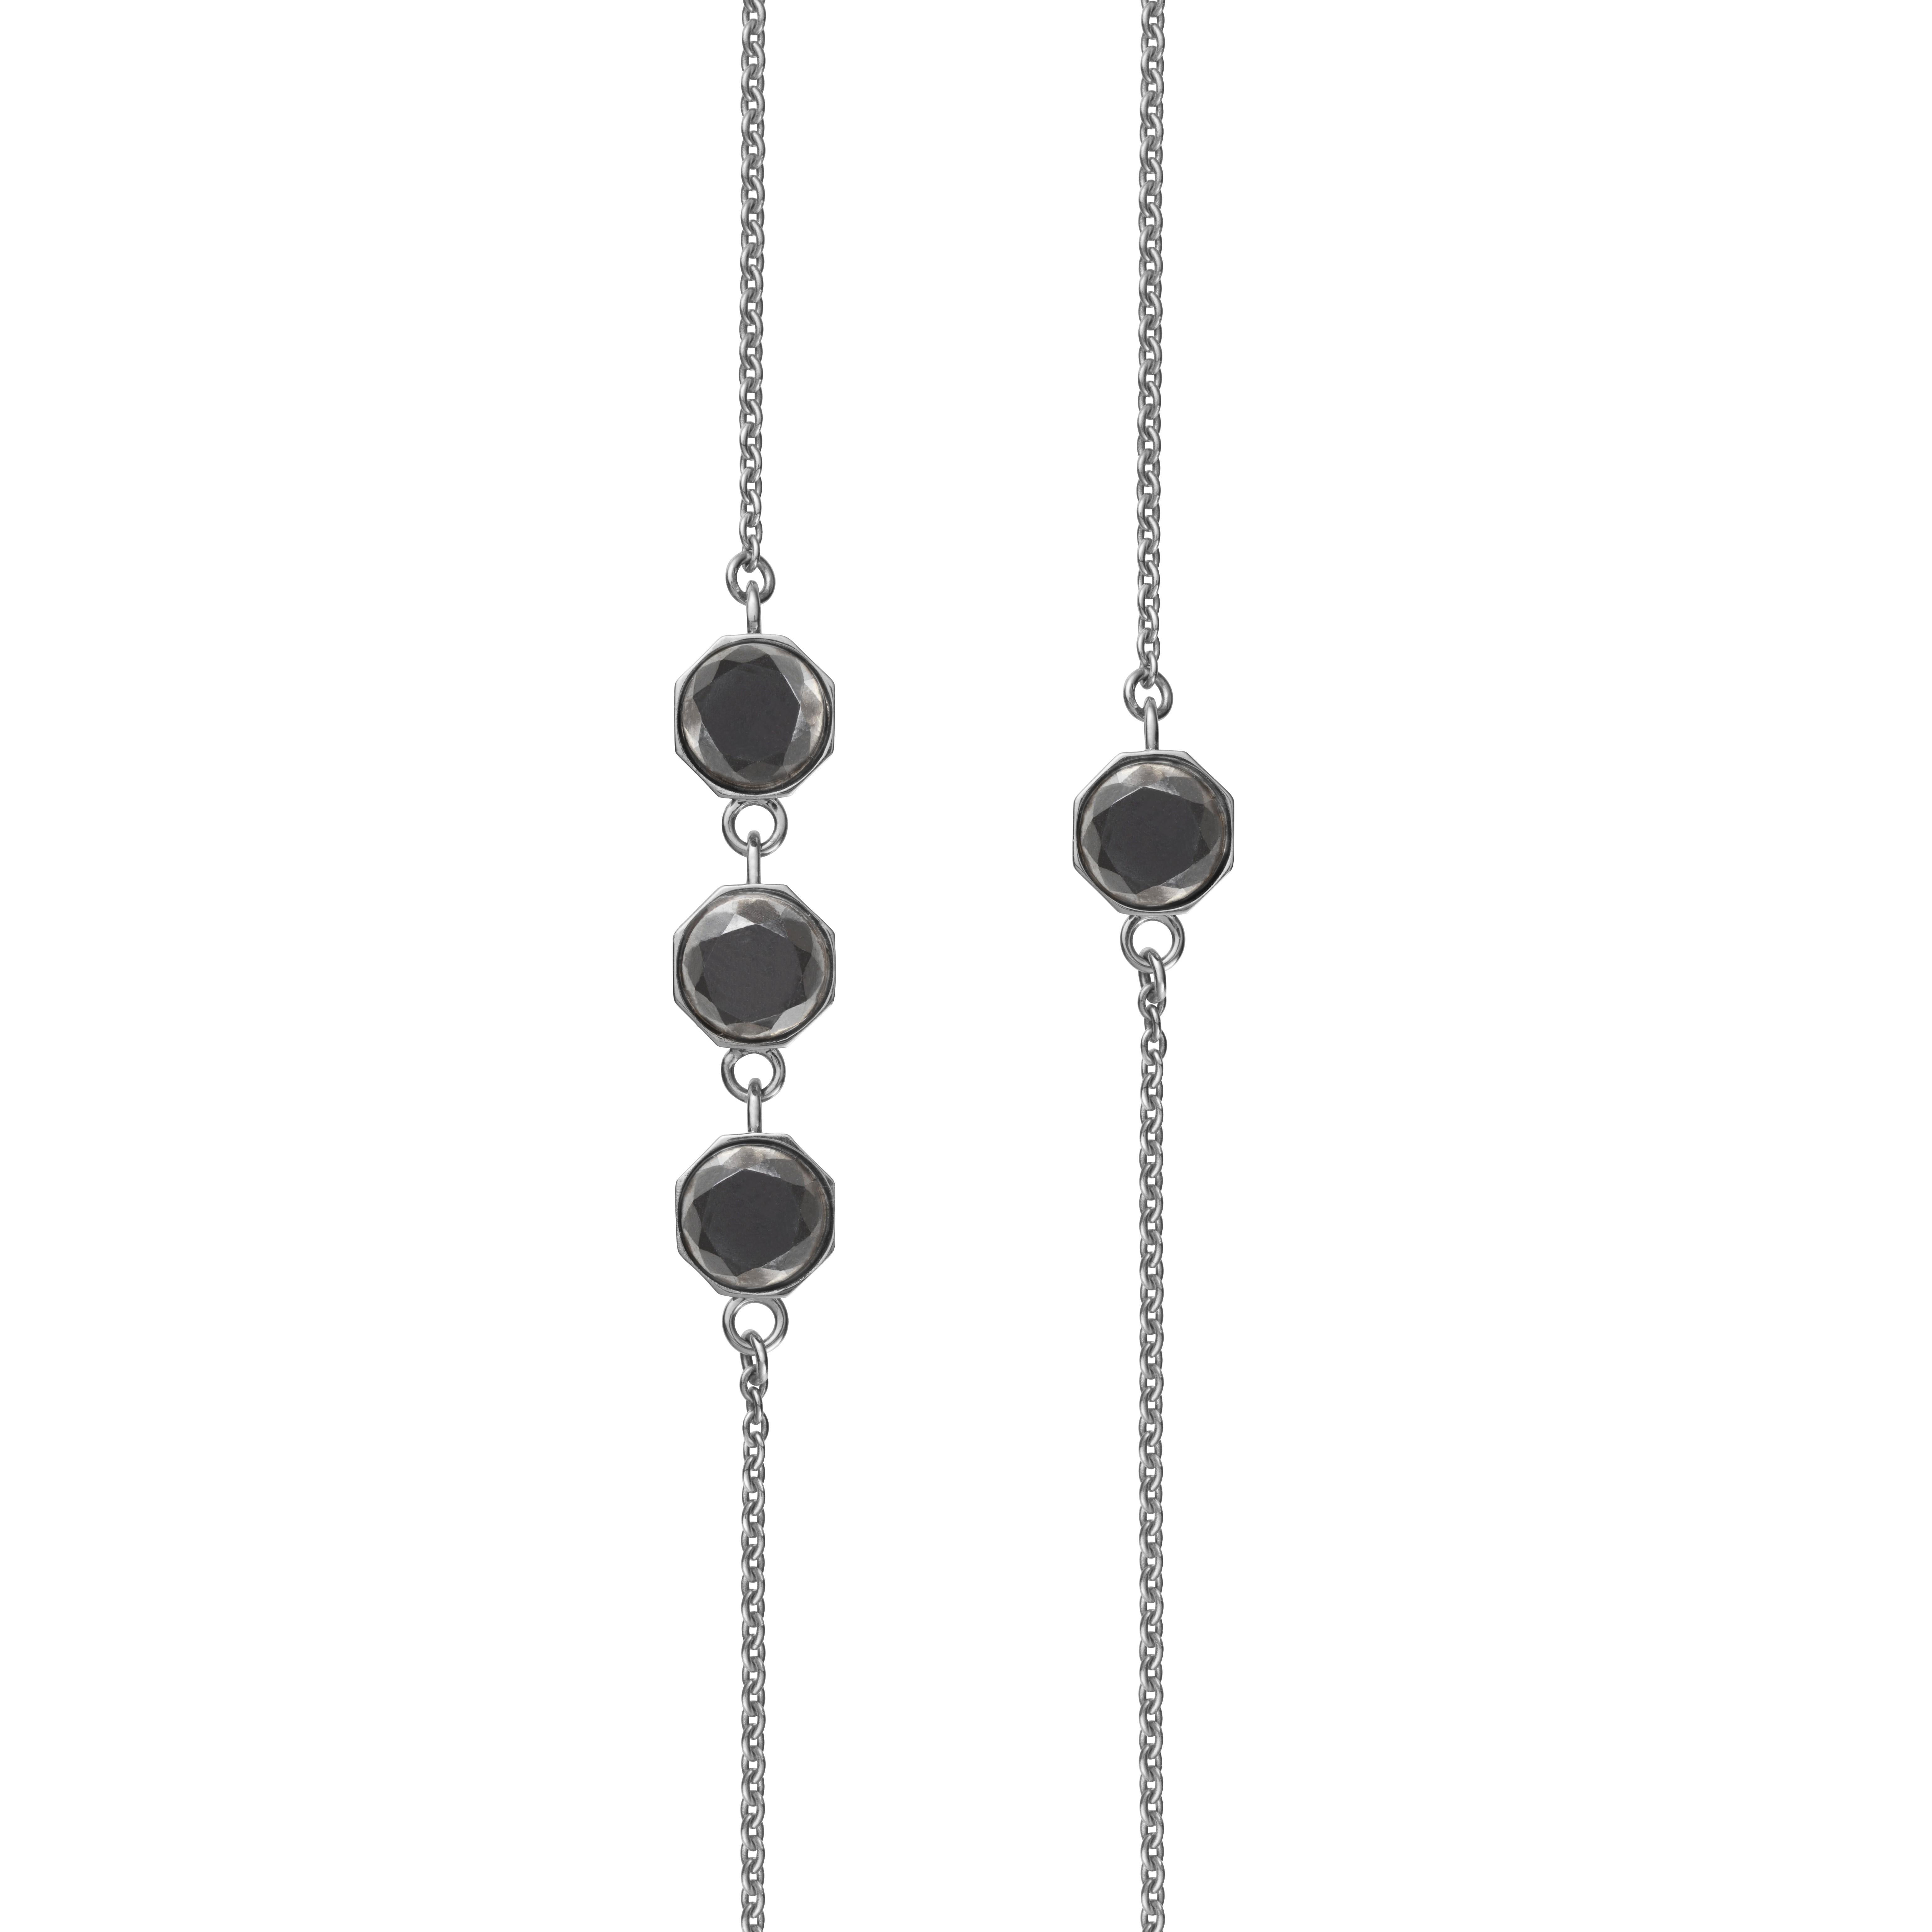 Also available in recycled 18k gold.

OTHER BLOOMS long necklace in solid recycled sterling silver with nine Old European Cut Mpingo Blackwood diamonds. Wear it full length or double.

Dimensions:
Length: 90 cm incl. S-lock and eyelet. Diamonds; 0,5